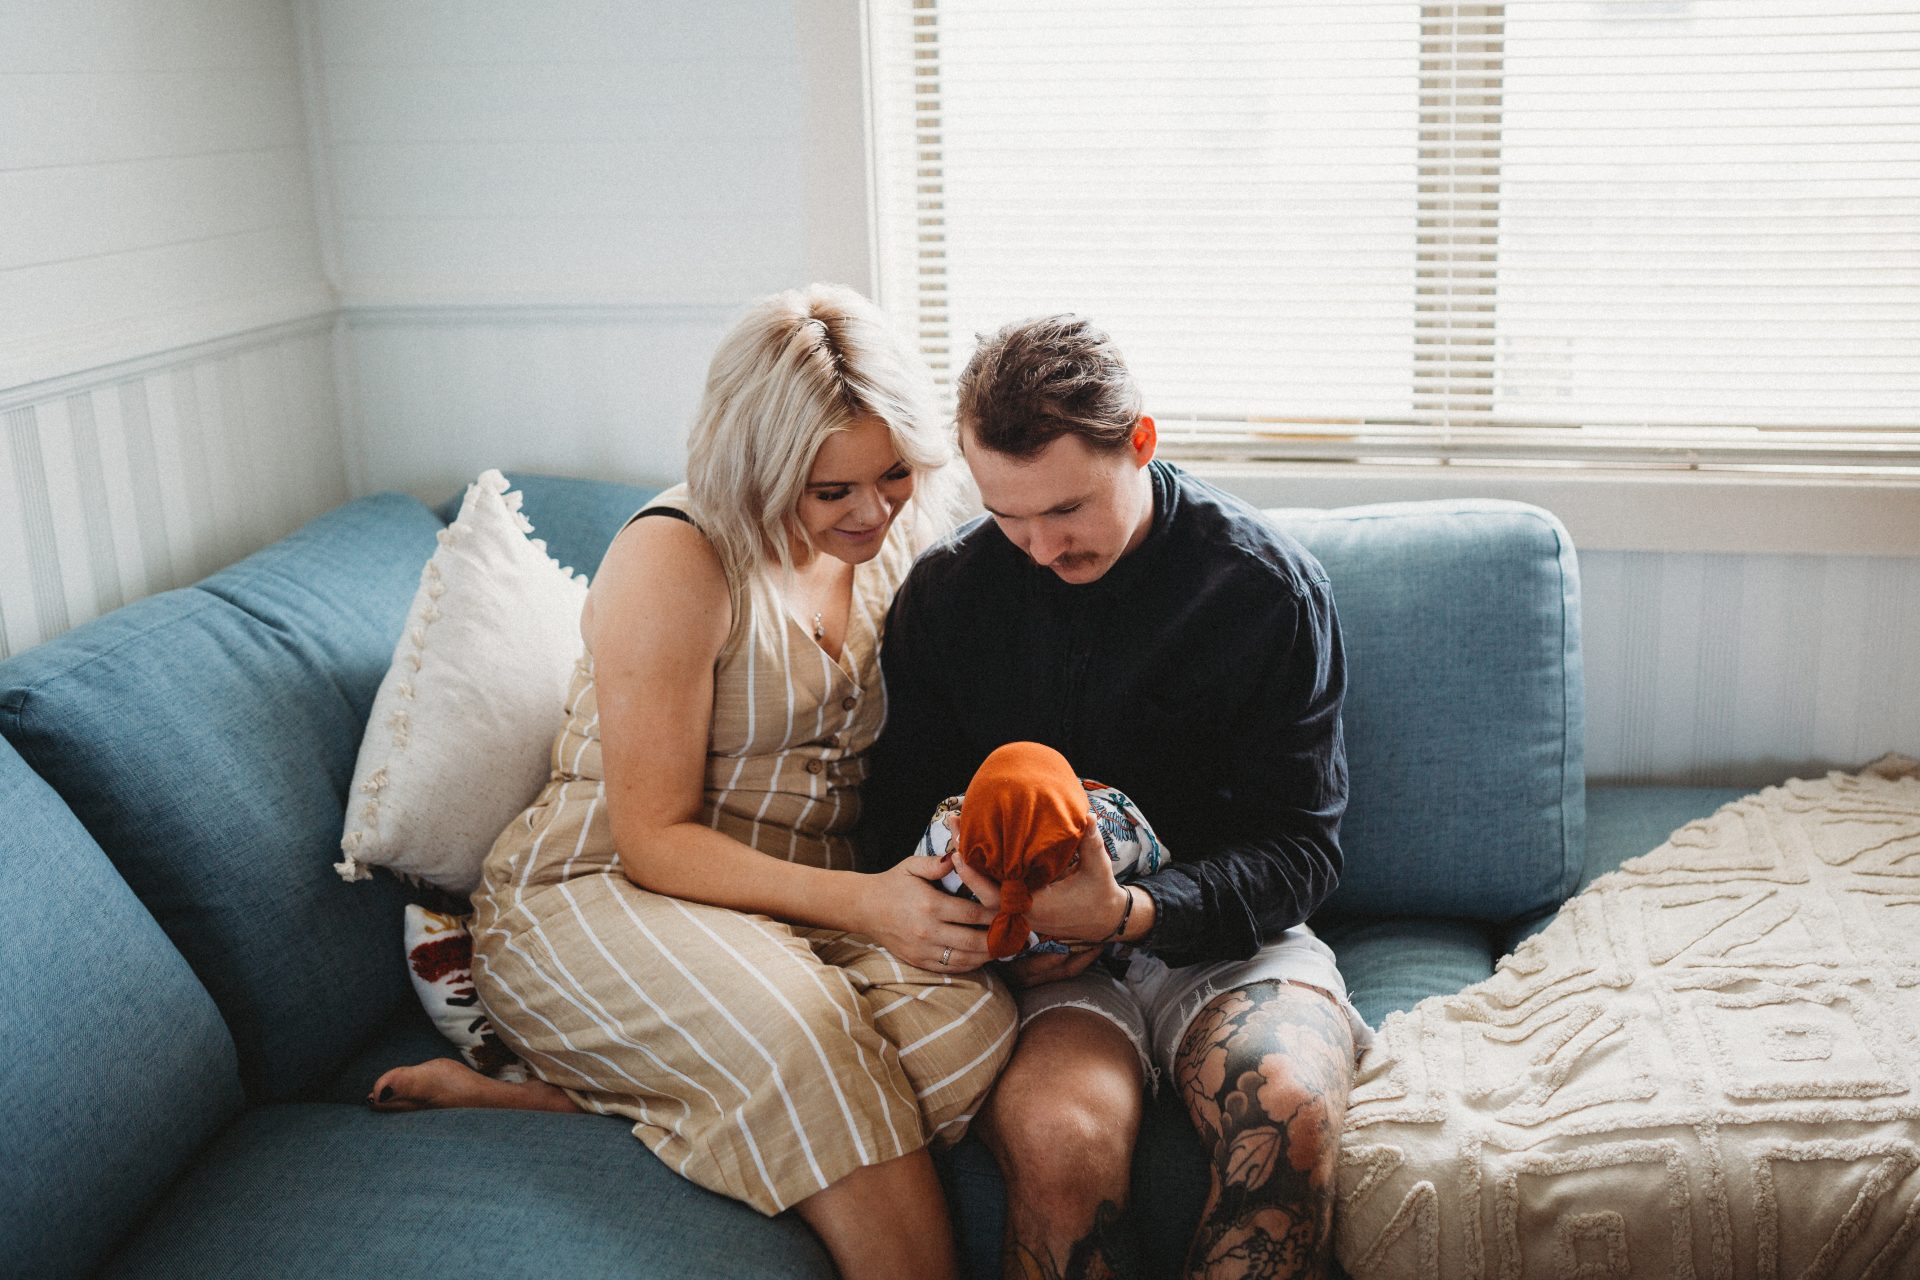 Young boho couple sitting together on couch, both holding newborn baby and looking down at him